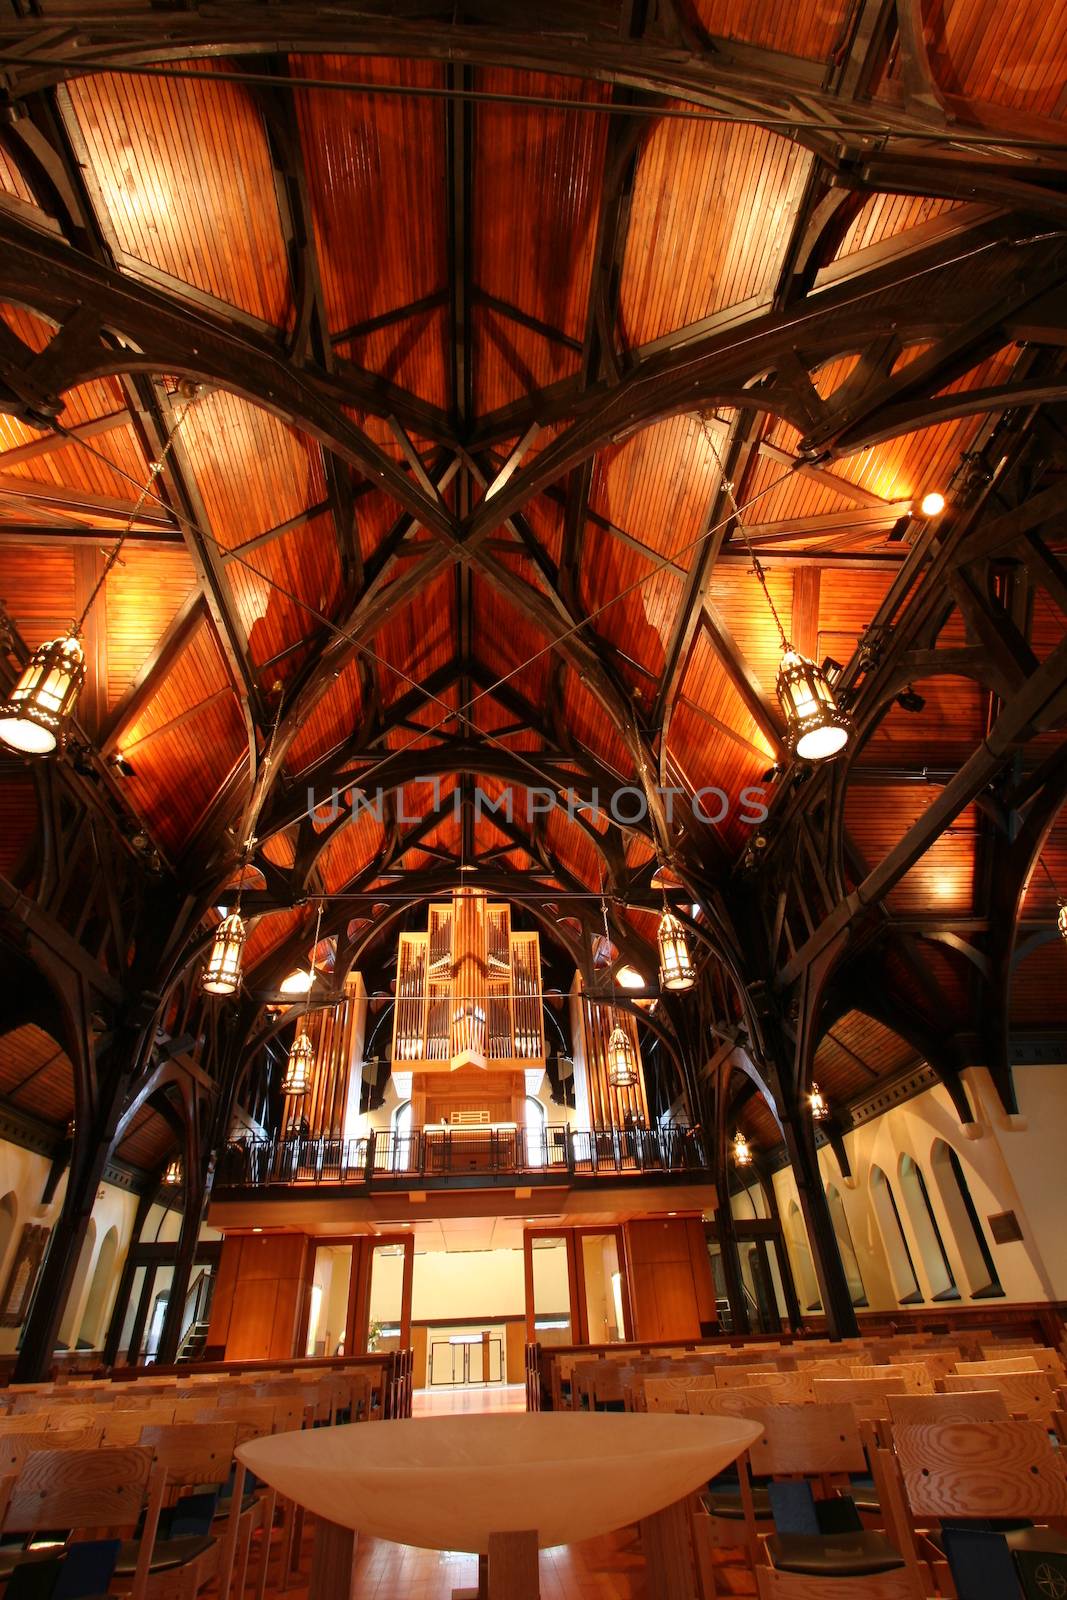 VANCOUVER, CANADA - DEC 9 204 : Interior of the Anglican Church on Walton  Street in Vancouver, British Columbia. It was established in 1914 and renovated at 2003.